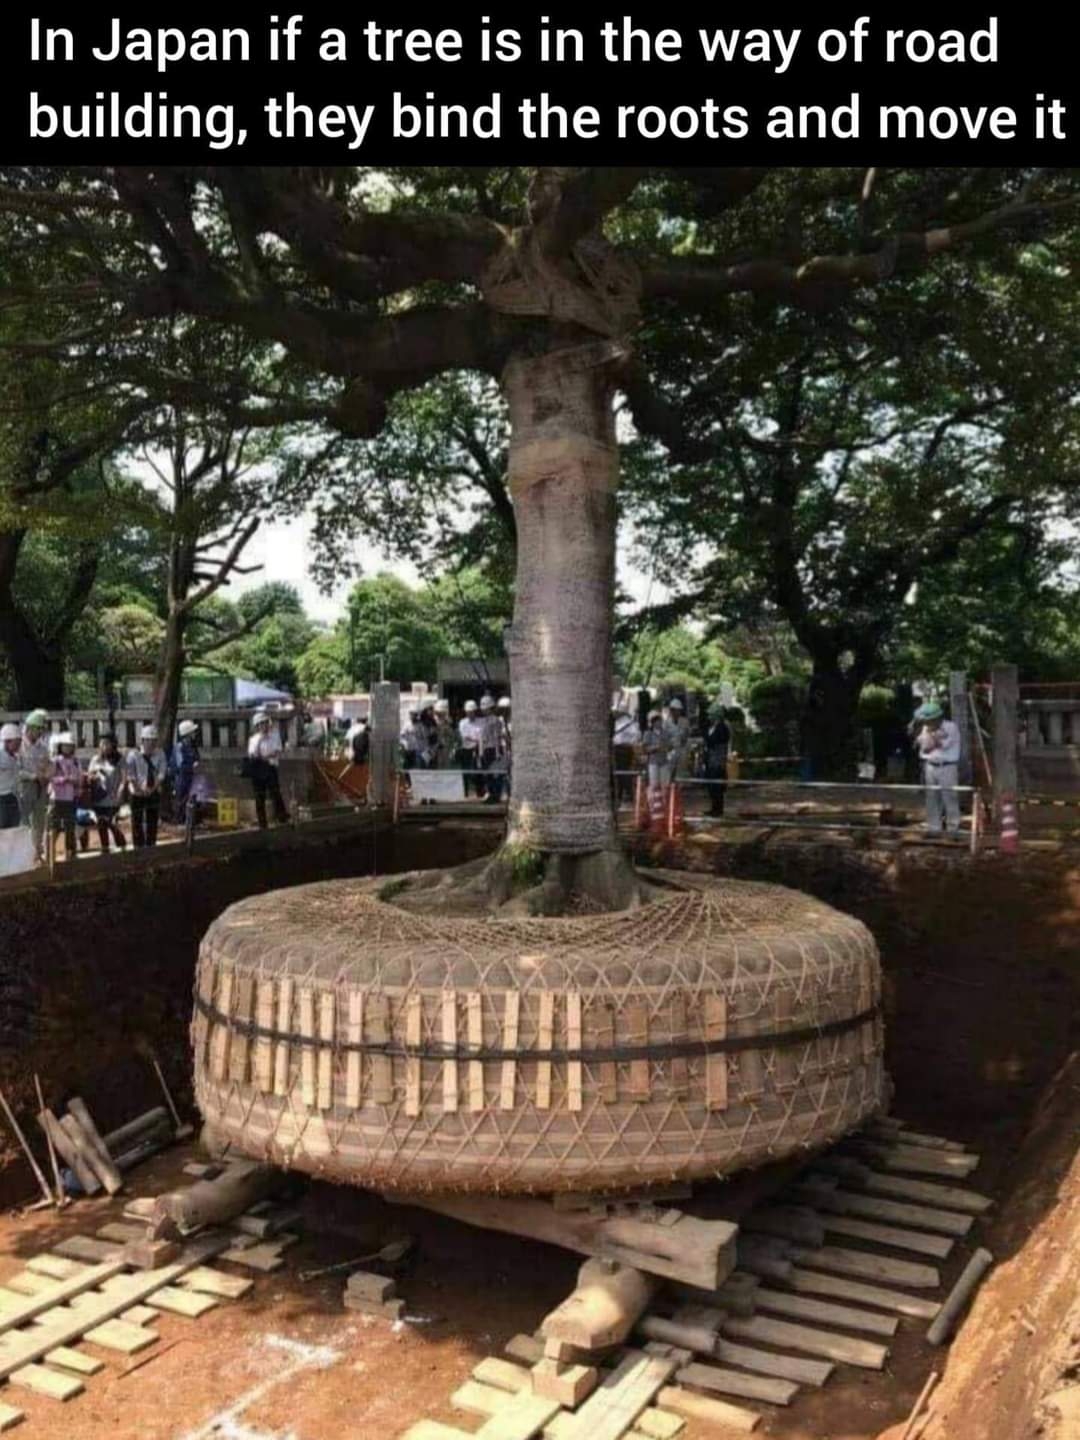 <p>In Japan, if a tree is in the way of road building, they bind the roots and move it only to plant it elsewhere.</p>
